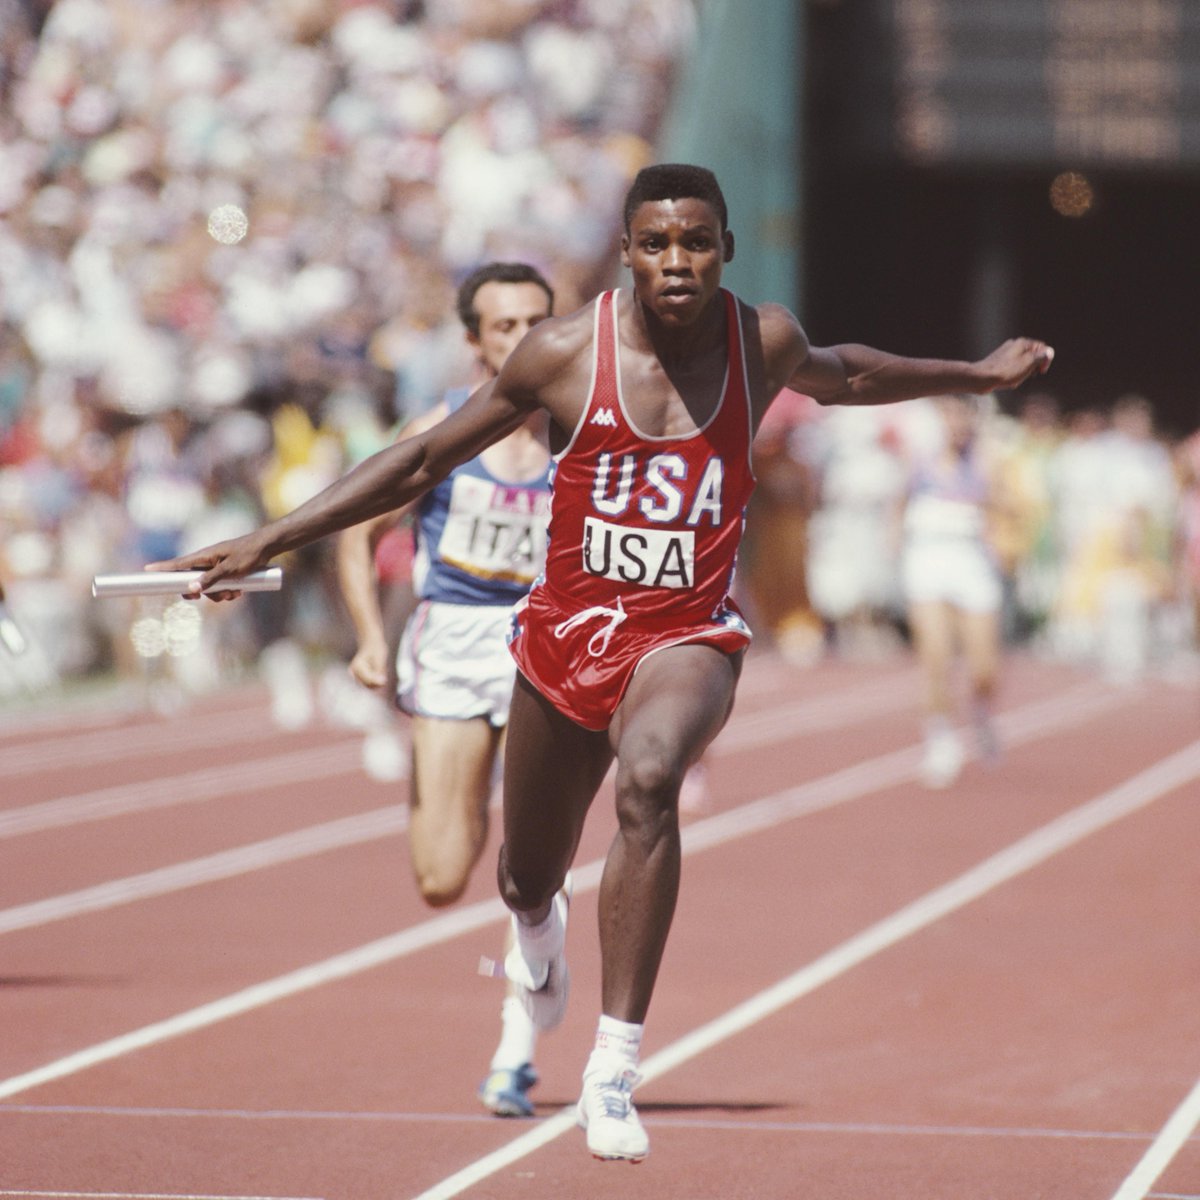 "It’s all about the journey, not the outcome."Carl Lewis, USA, at...